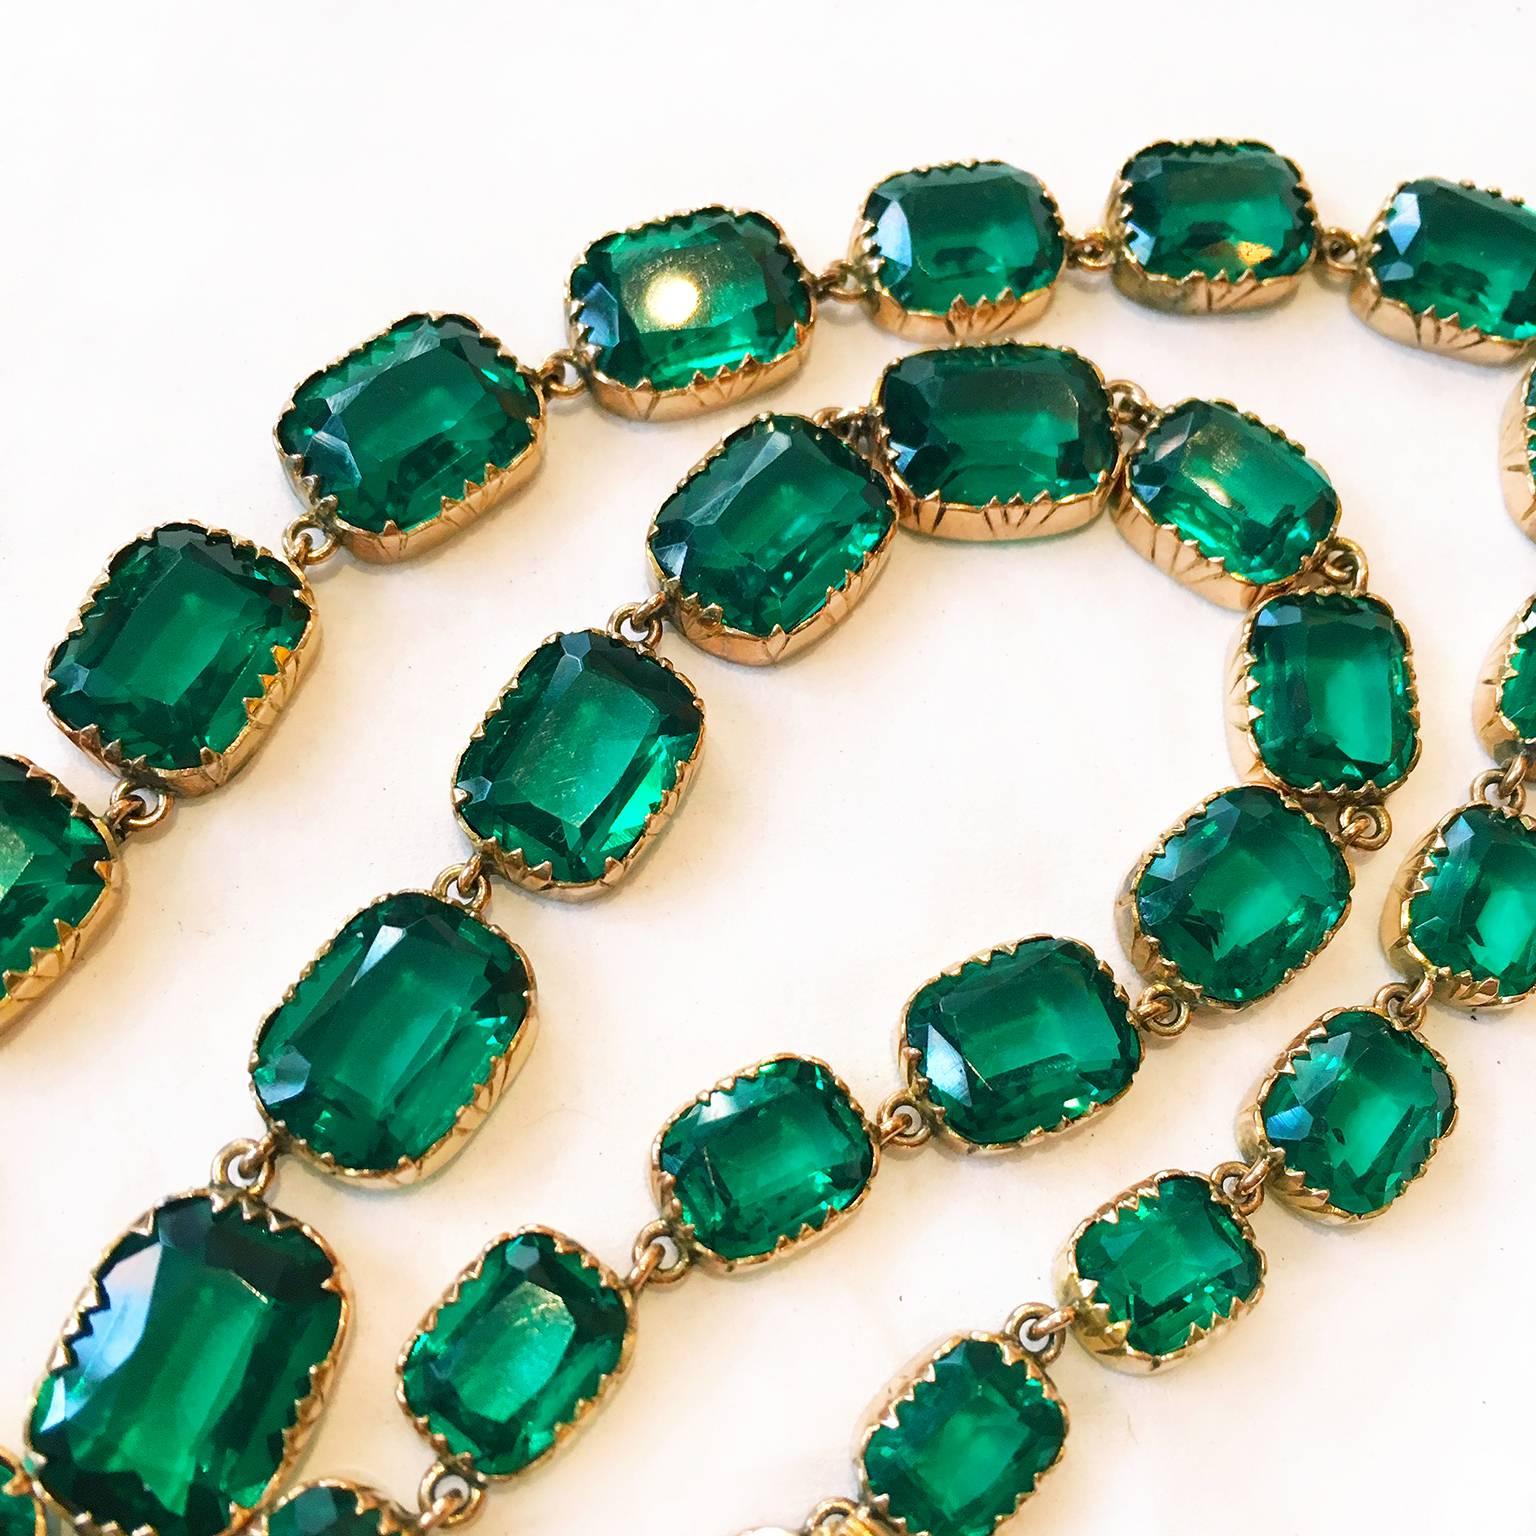 A stunningly vivid and rich green flat-cut Georgian Green Emerald Paste Rivière Necklace. Set in 15k rose gold. Each paste stone shows a soft-edged rectangular shape, set as open back in graduated sizes with the largest stones in the center. The